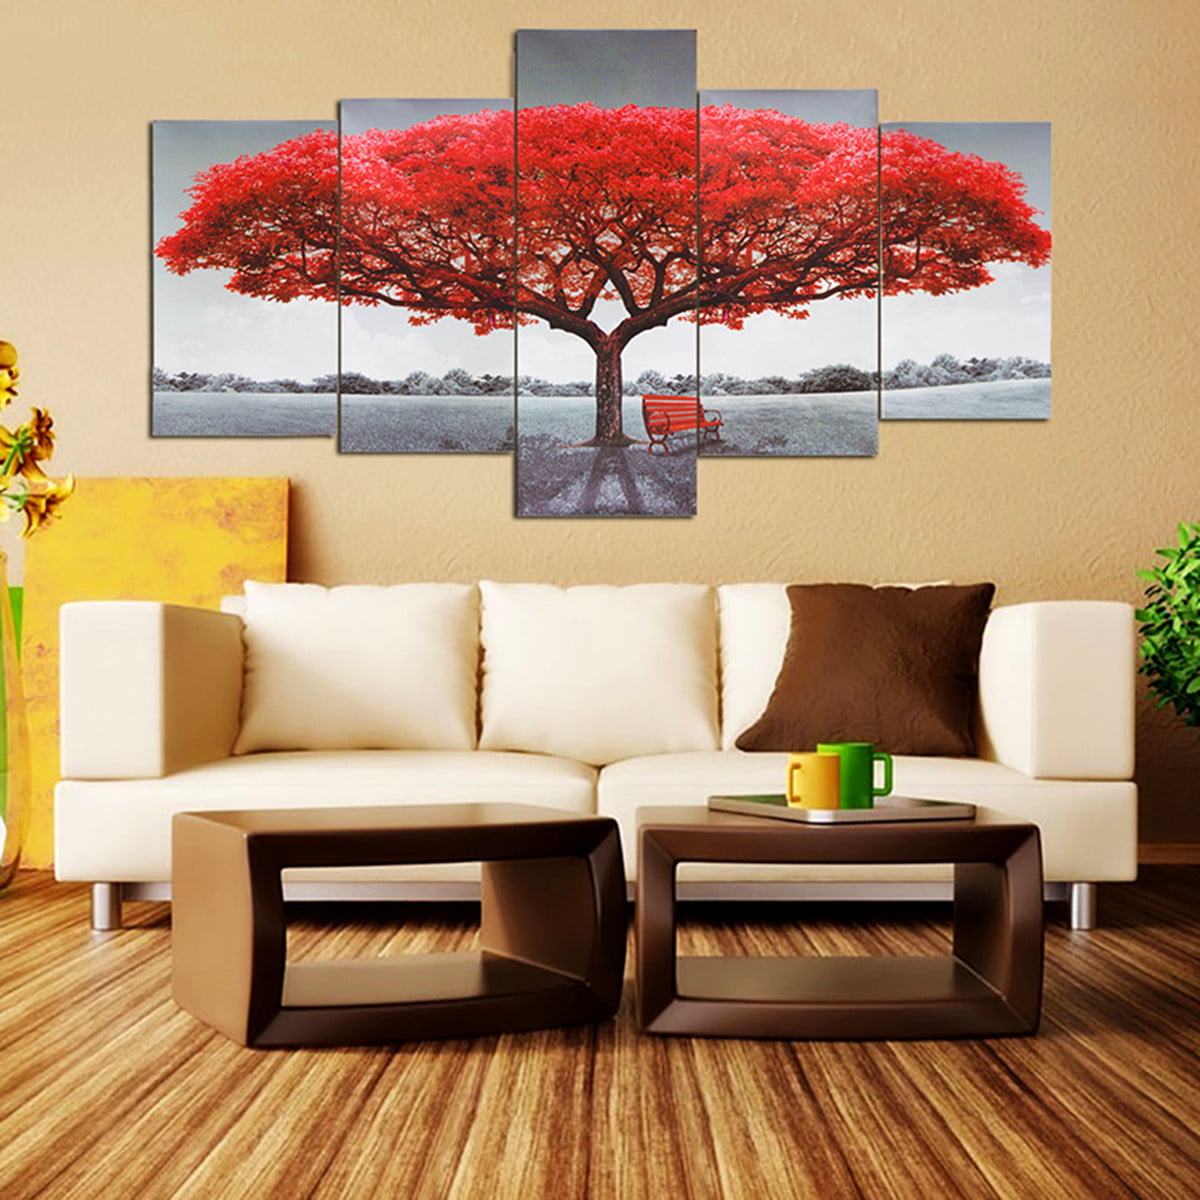 Canvas Abstract Art Prints Oil Painting Modern Color Picture Living Room Decor